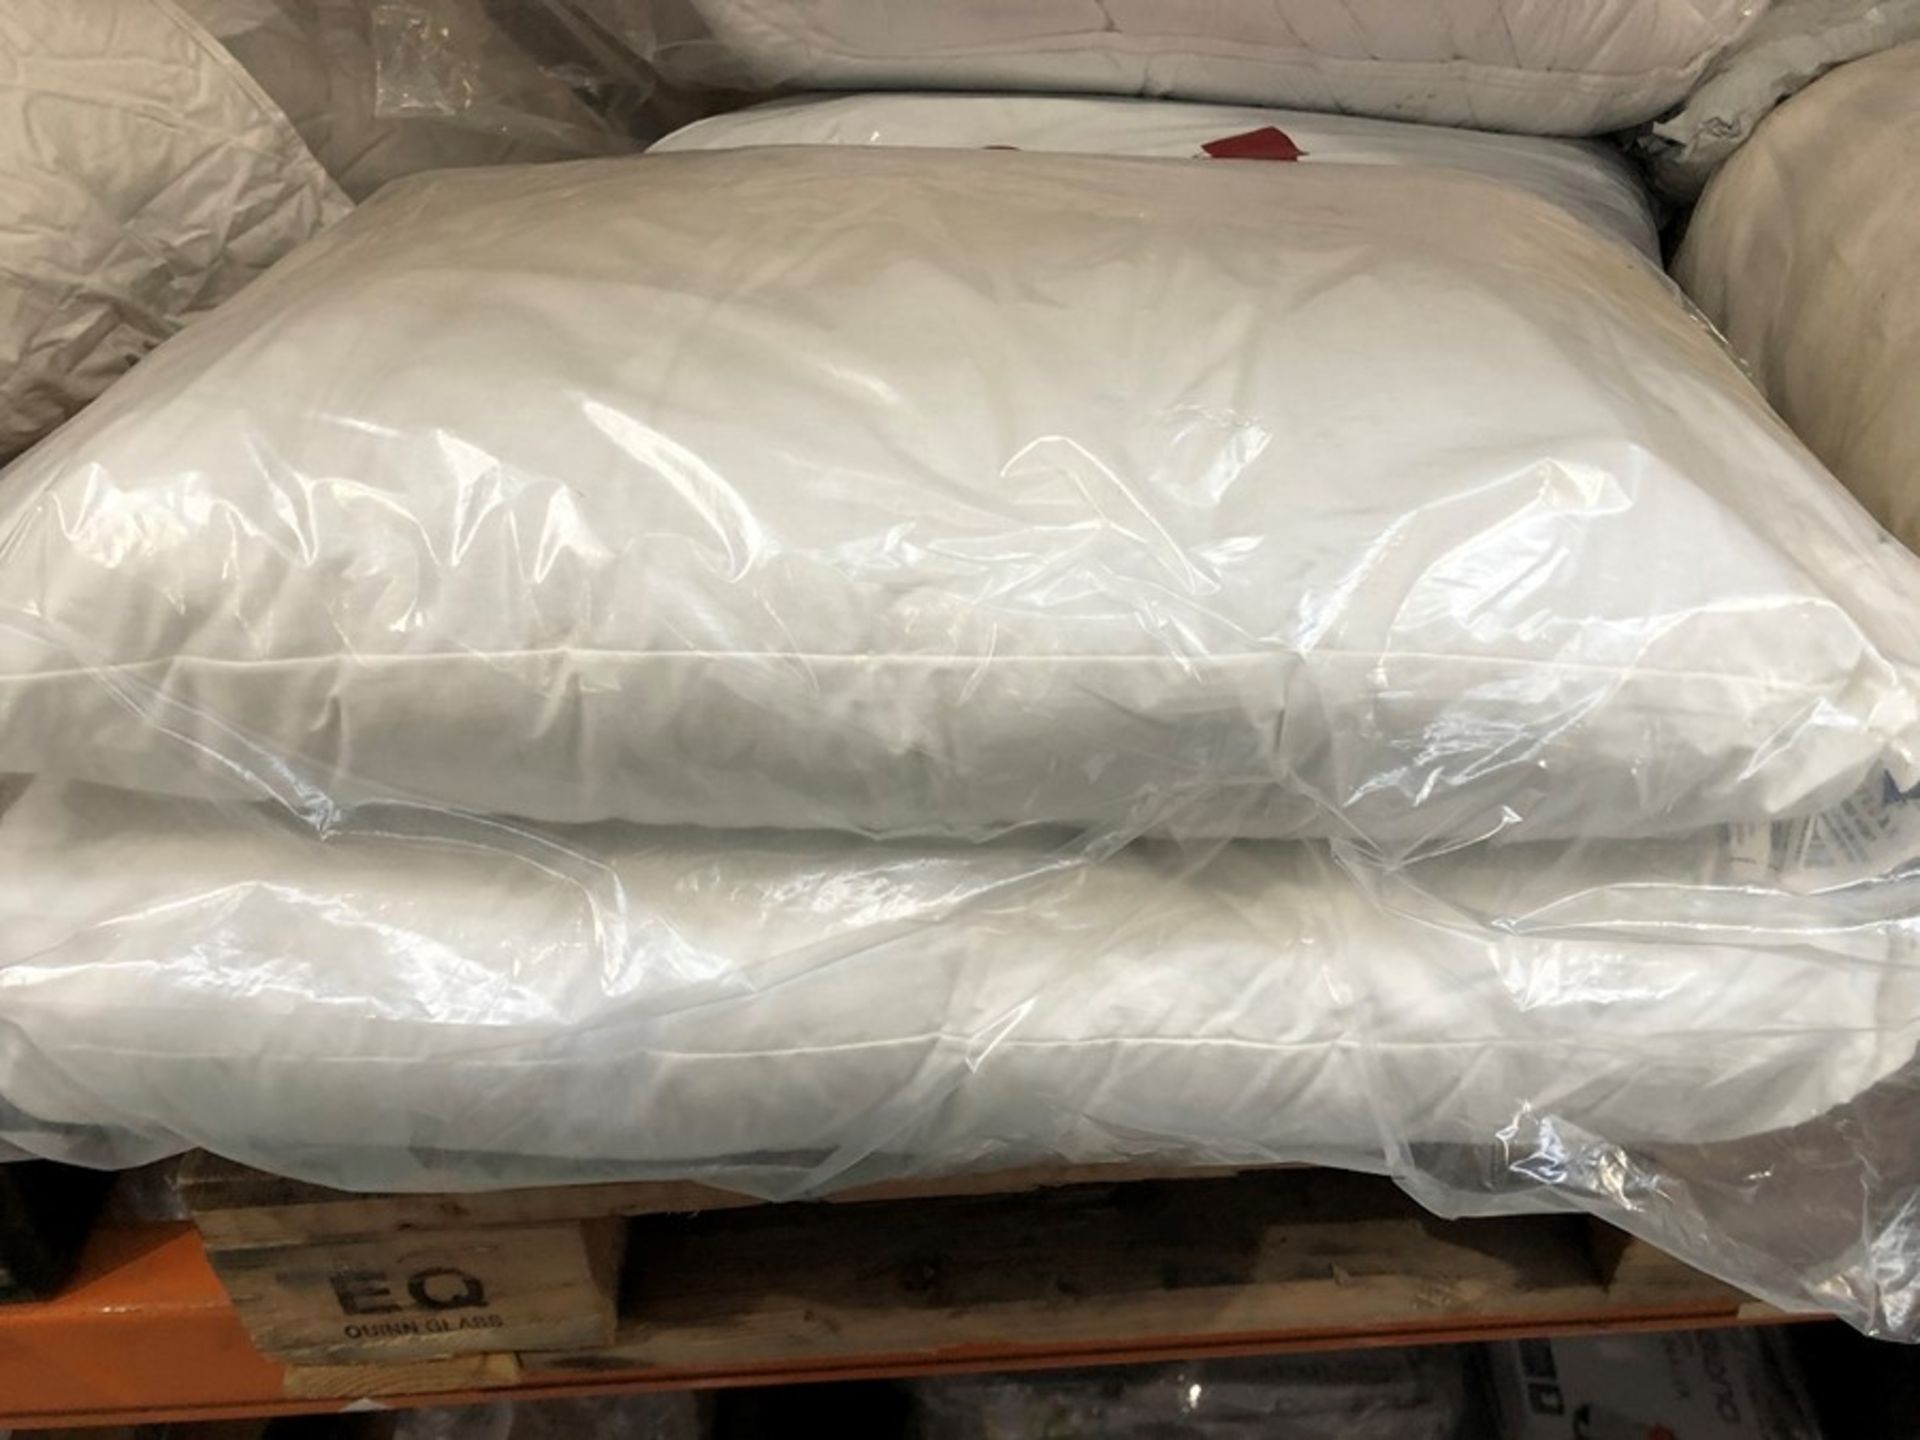 1 LOT TO CONTAIN 2 HIGH QUALITY PILLOWS - WHITE (SOLD AS SEEN)